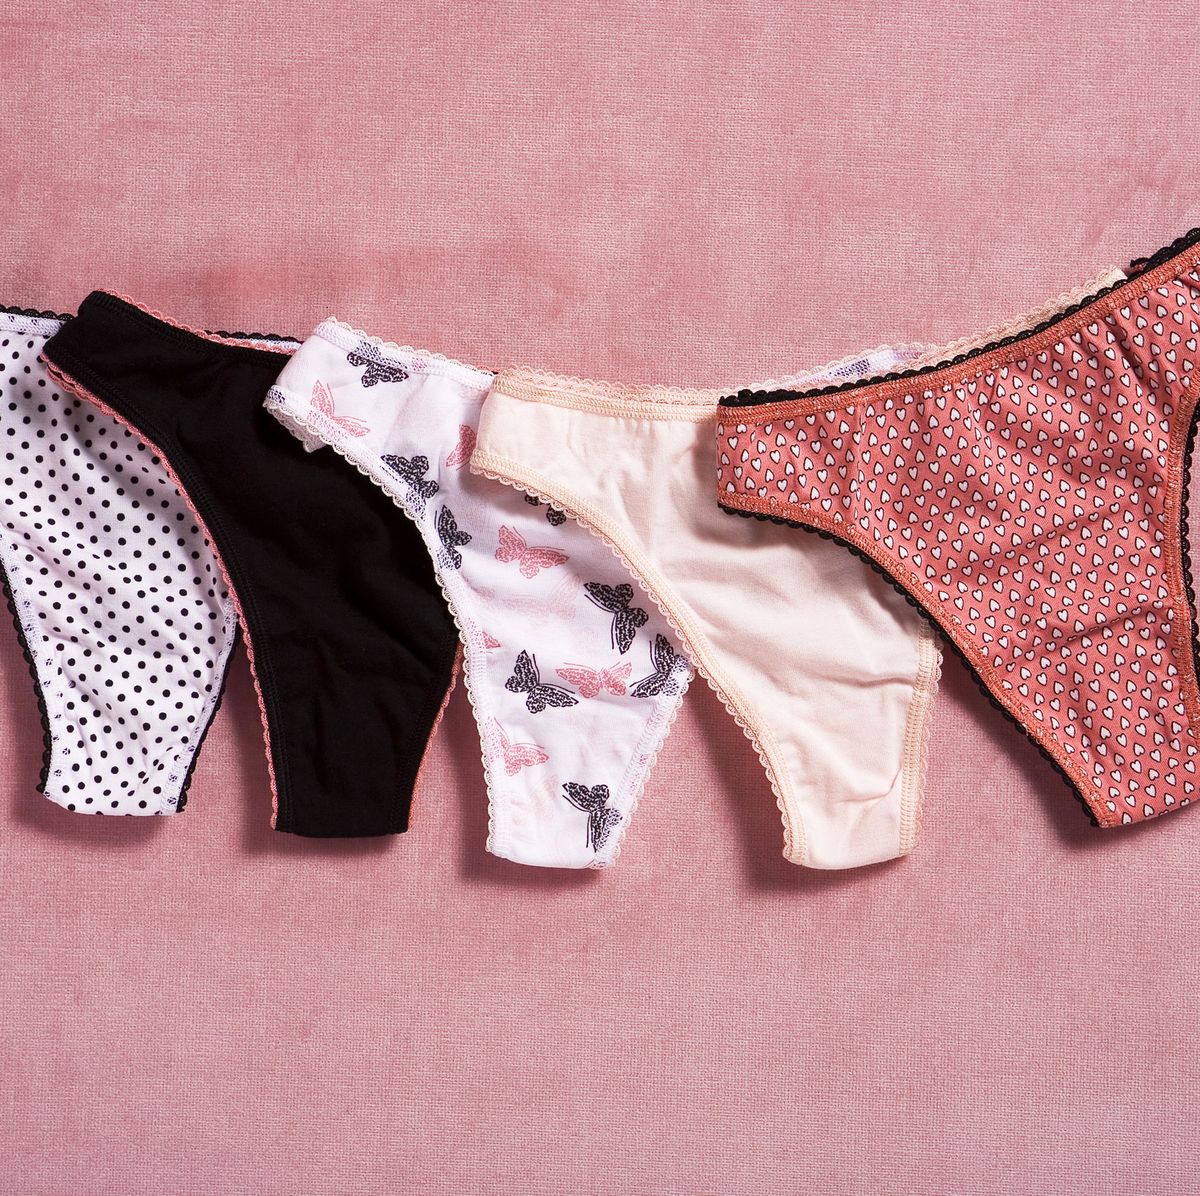 How Thong Underwear Came To Be And 6 More Fashion Facts (PHOTOS